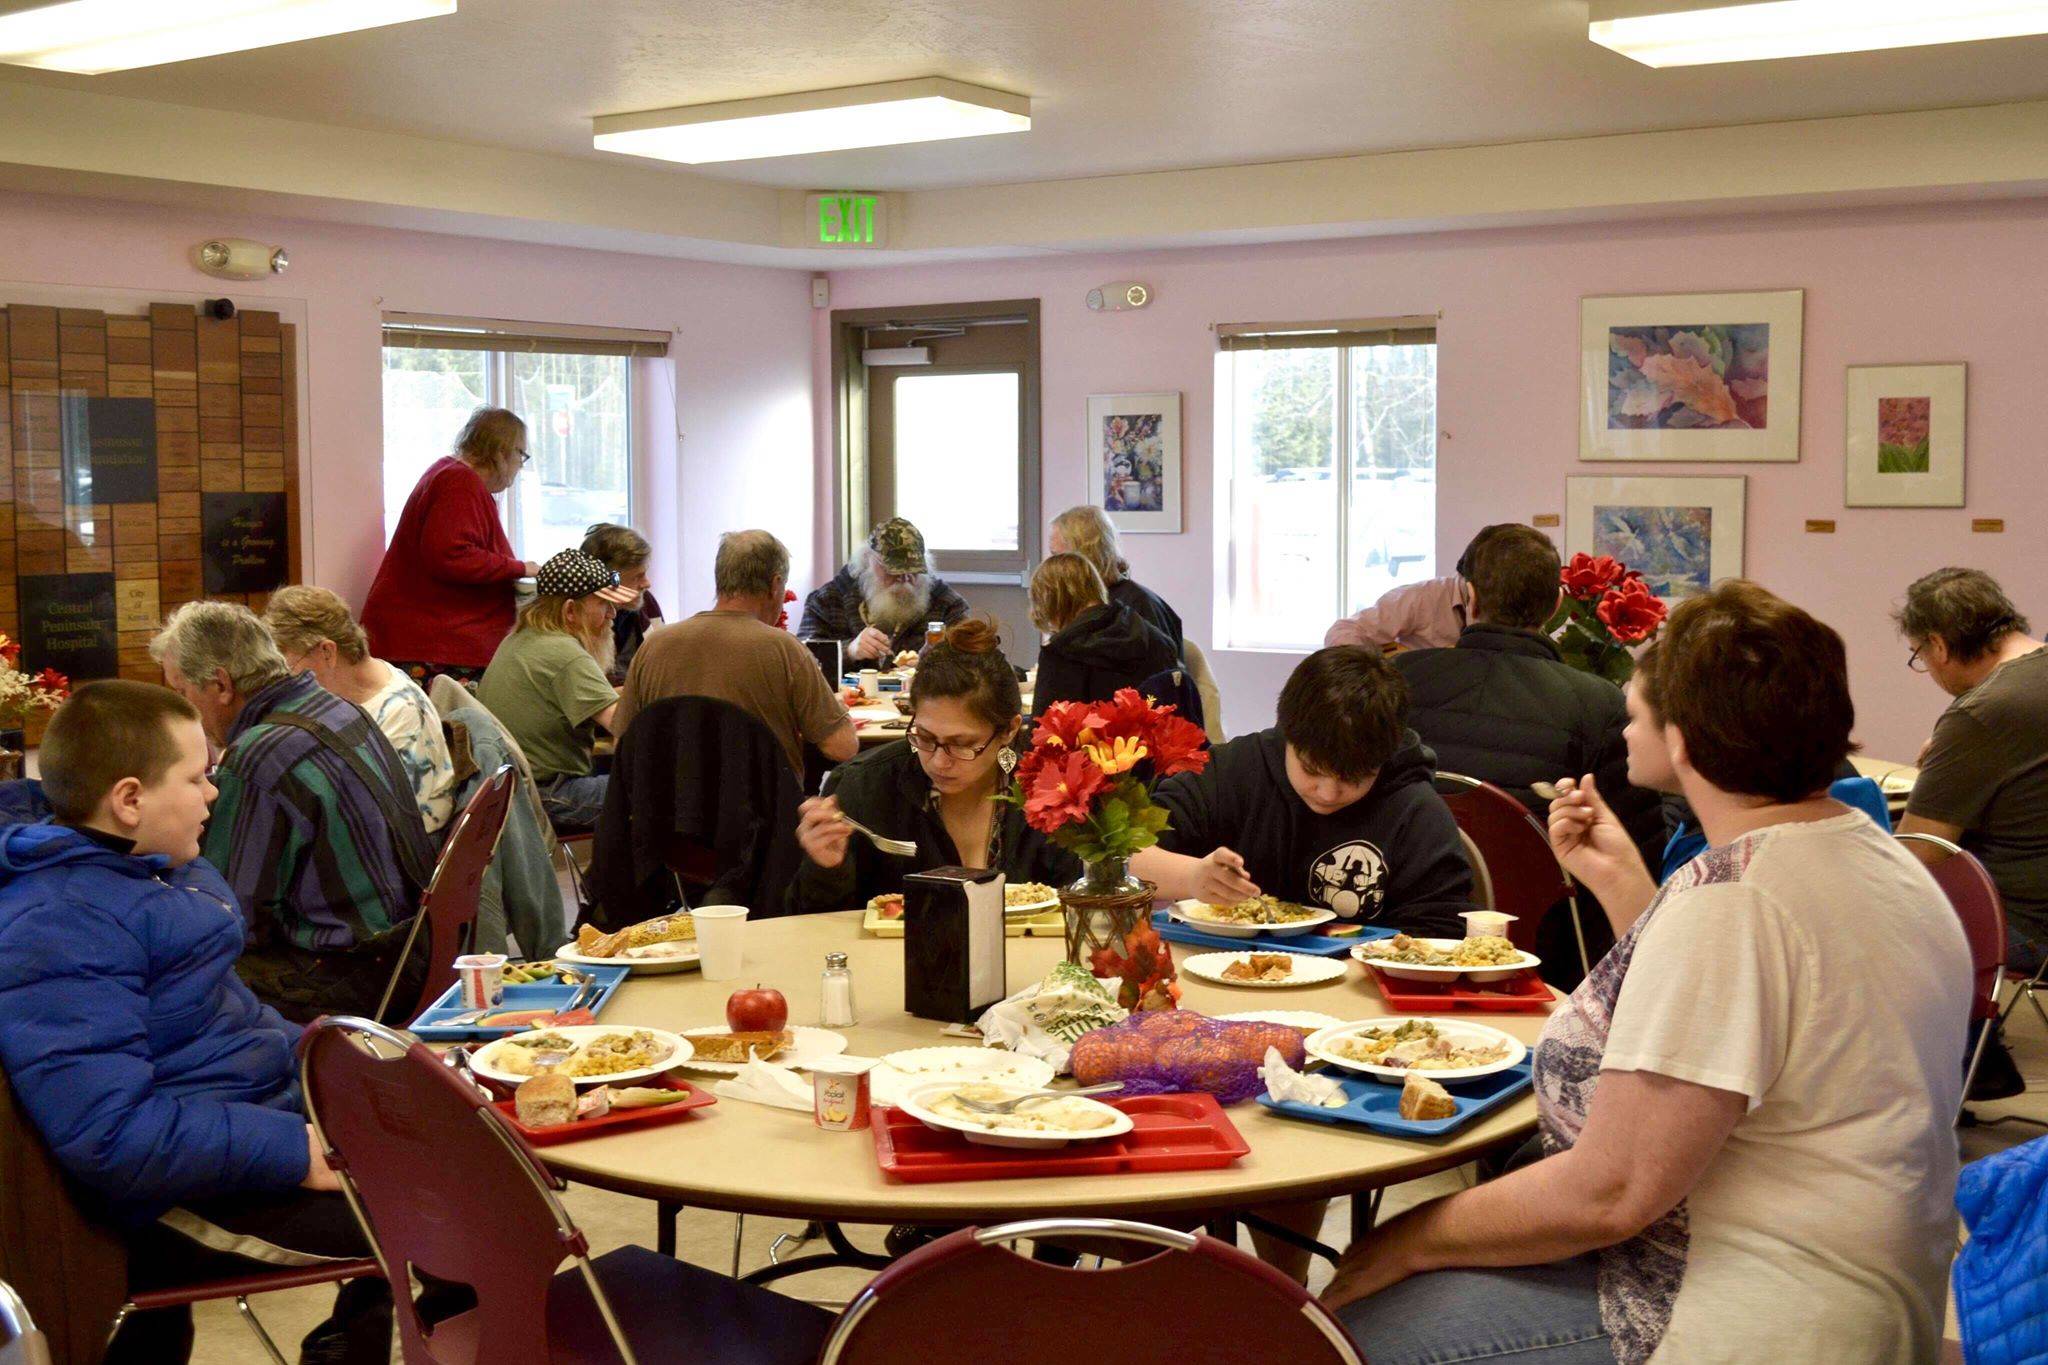 Kenai Peninsula Food Bank hosted an early Thanksgiving meal on Wednesday near Soldotna (Photo by Victoria Petersen/Peninsula Clarion)